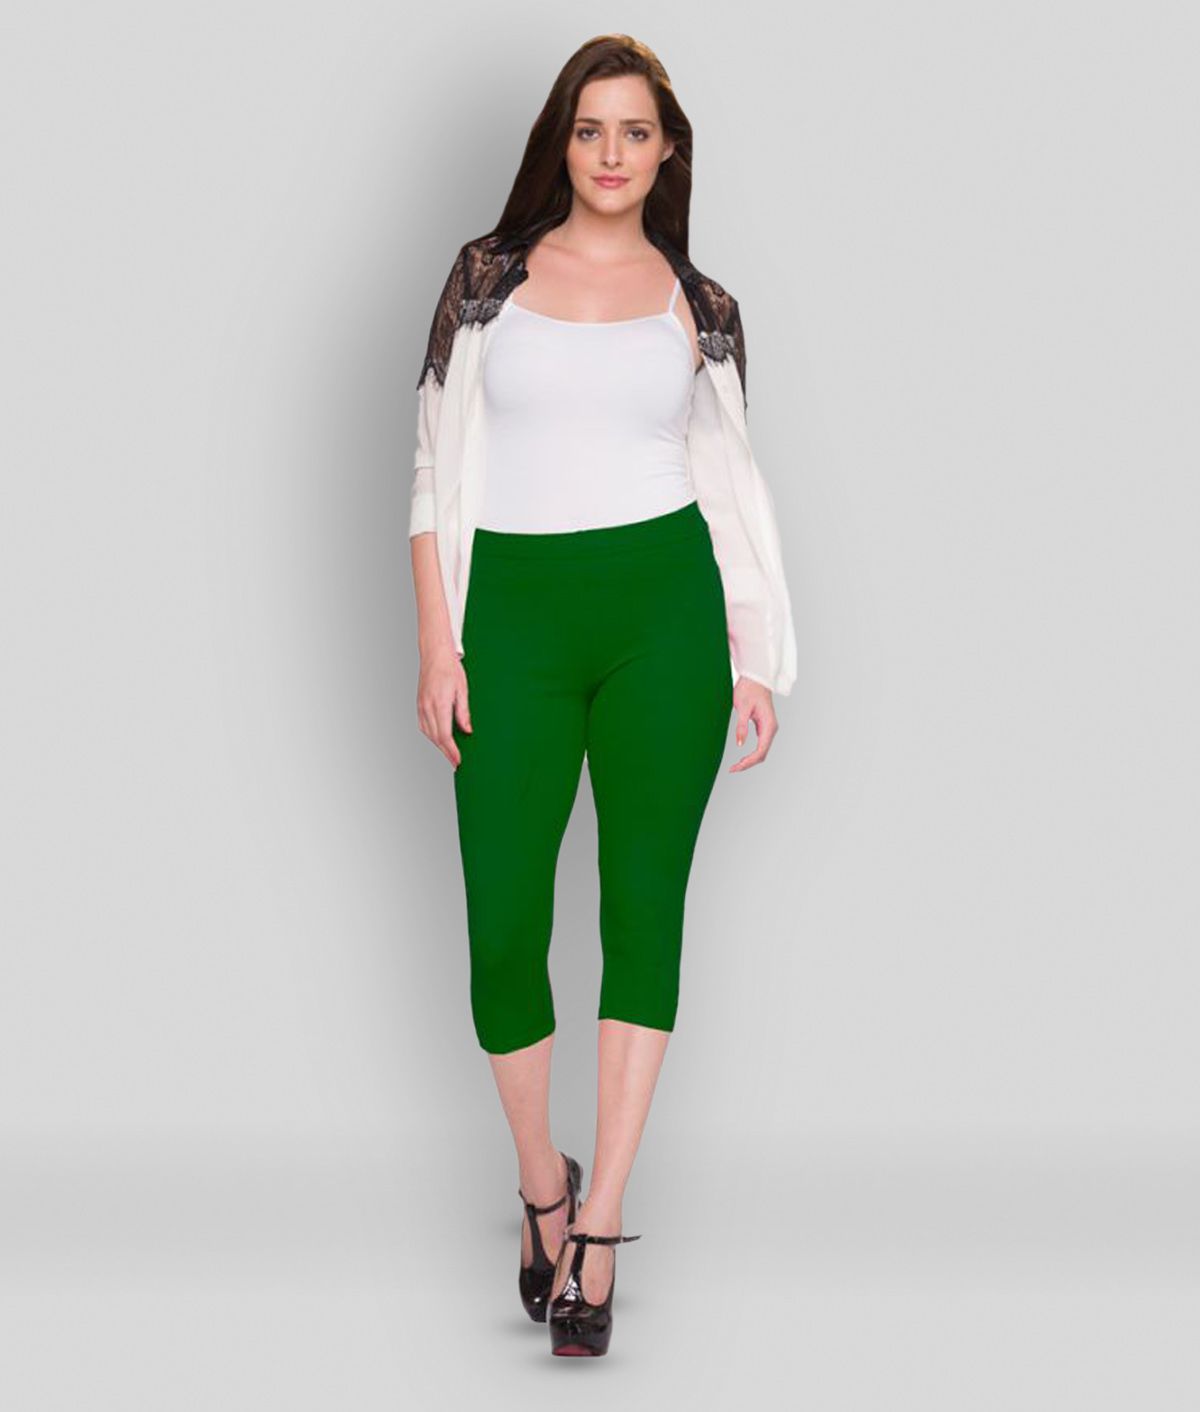 Dollar Missy - Green Cotton Slim Fit Women's Casual Pants  ( Pack of 1 )